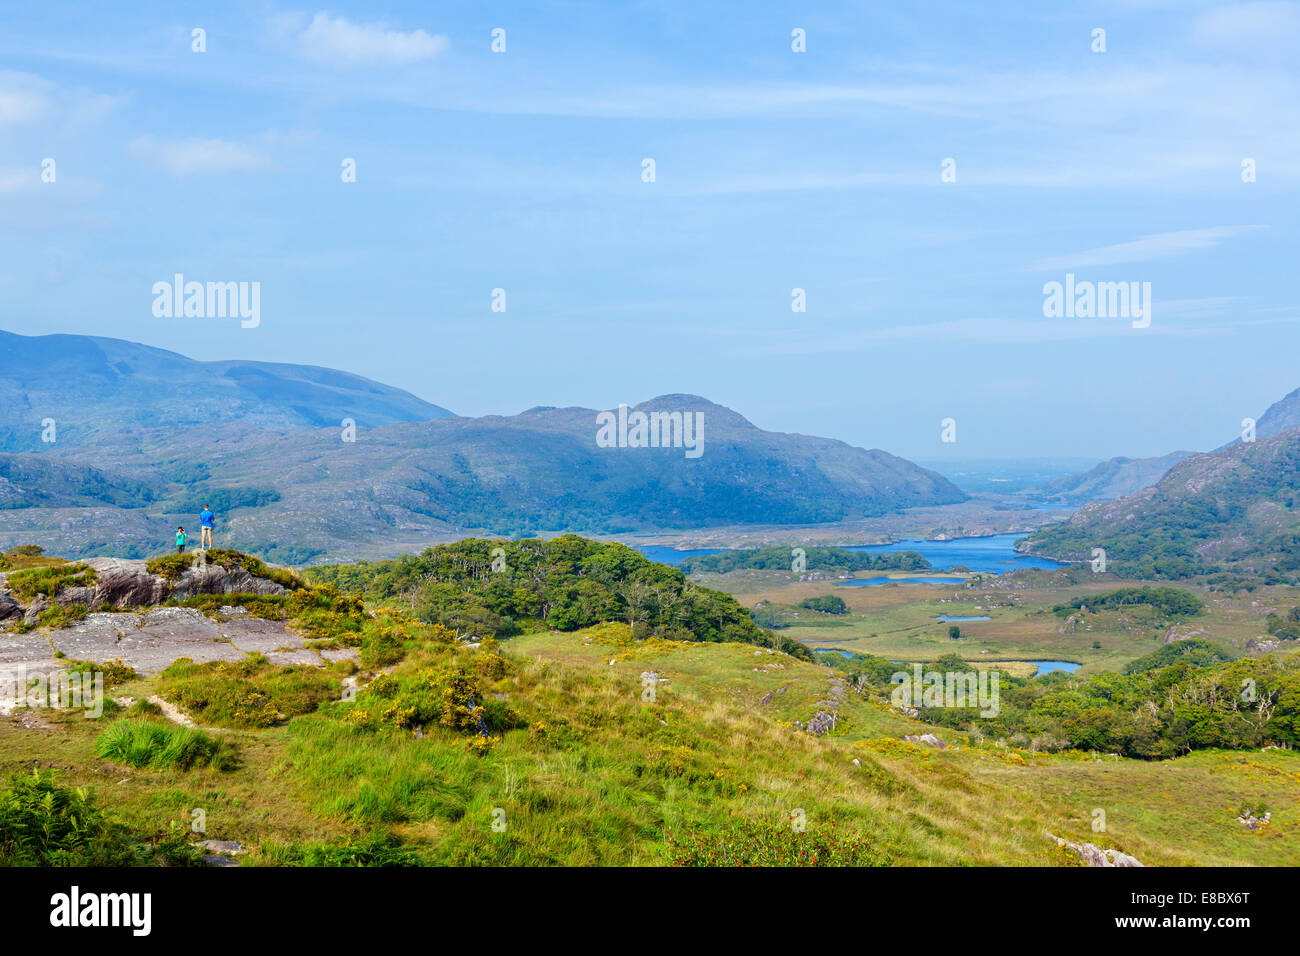 Tourists at Ladies View overlooking the Lakes of Killarney N71 Ring of Kerry, Killarney National Park, County Kerry, Ireland Stock Photo